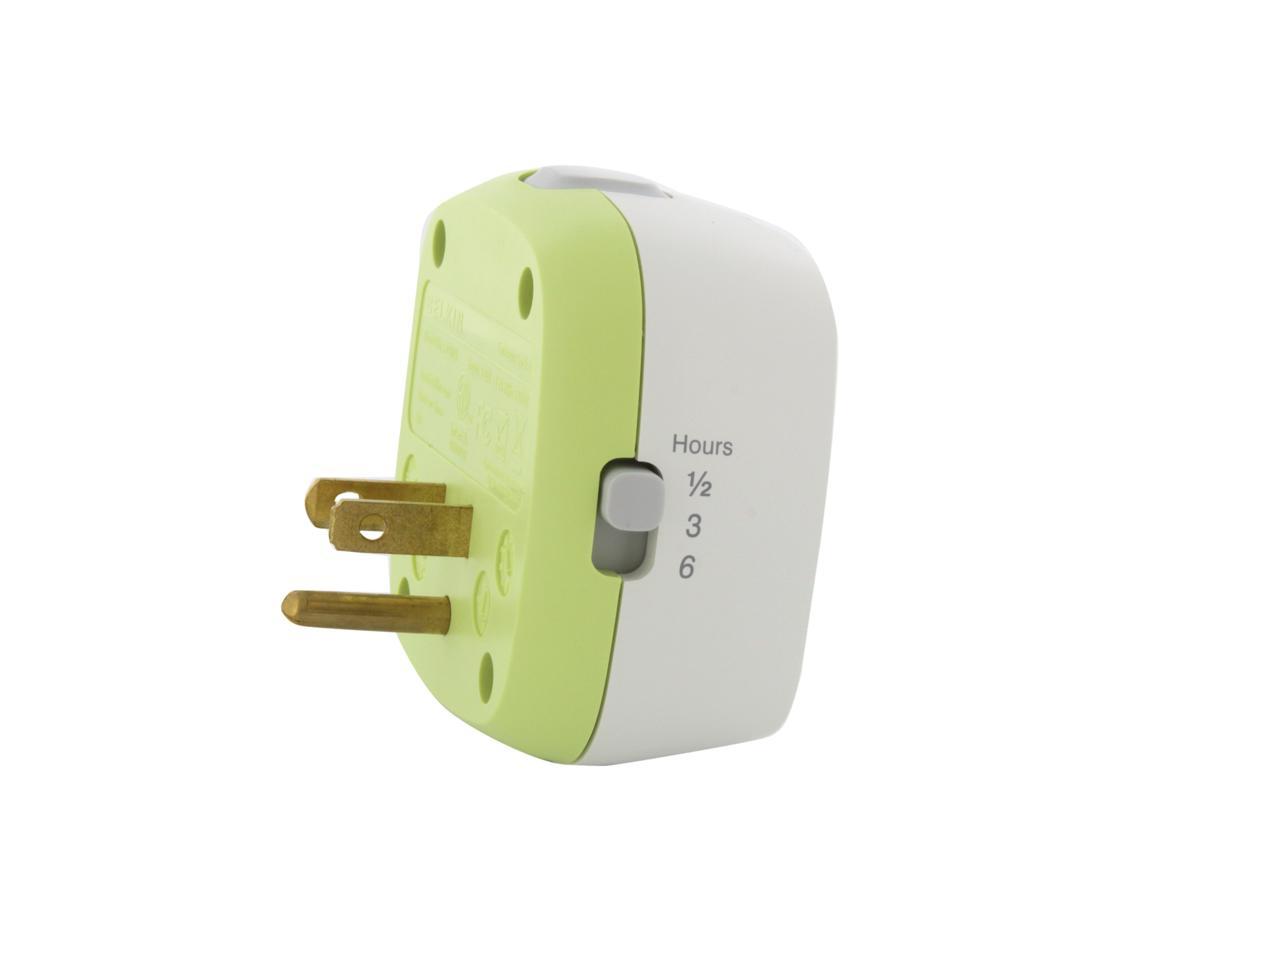 F7C009q Free Shipping New Belkin Conserve Socket Energy-Saving Outlet 